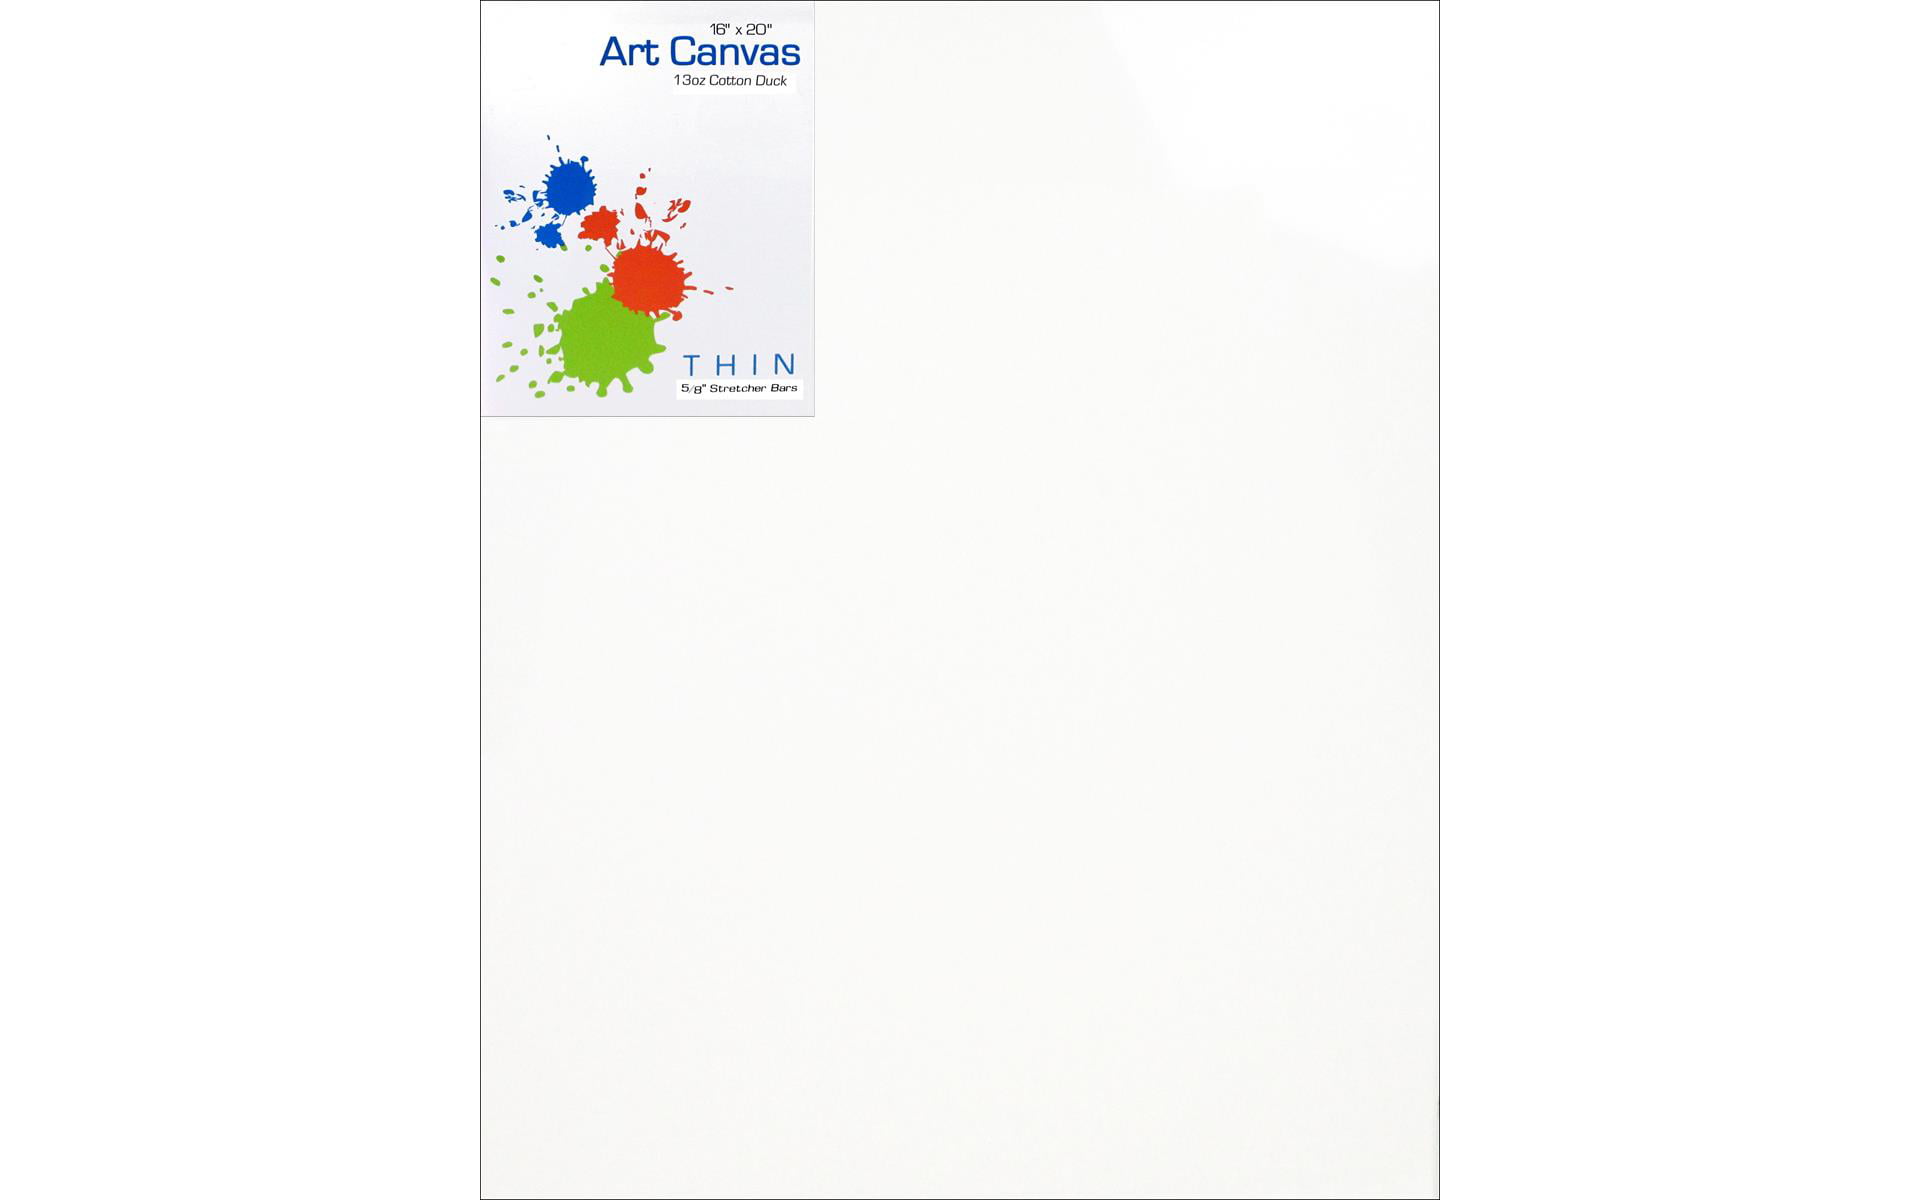 U.S. Art Supply 16 x 20 10-Sheet 8-Ounce Triple Primed Acid-Free Canvas Paper Pad (Pack of 2 Pads)